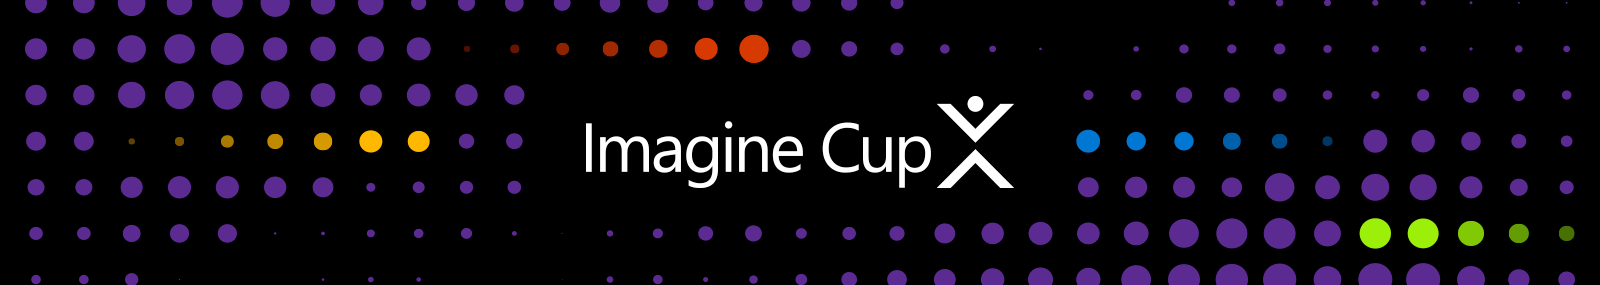 Imagine Cup logo with a colored dot background pattern